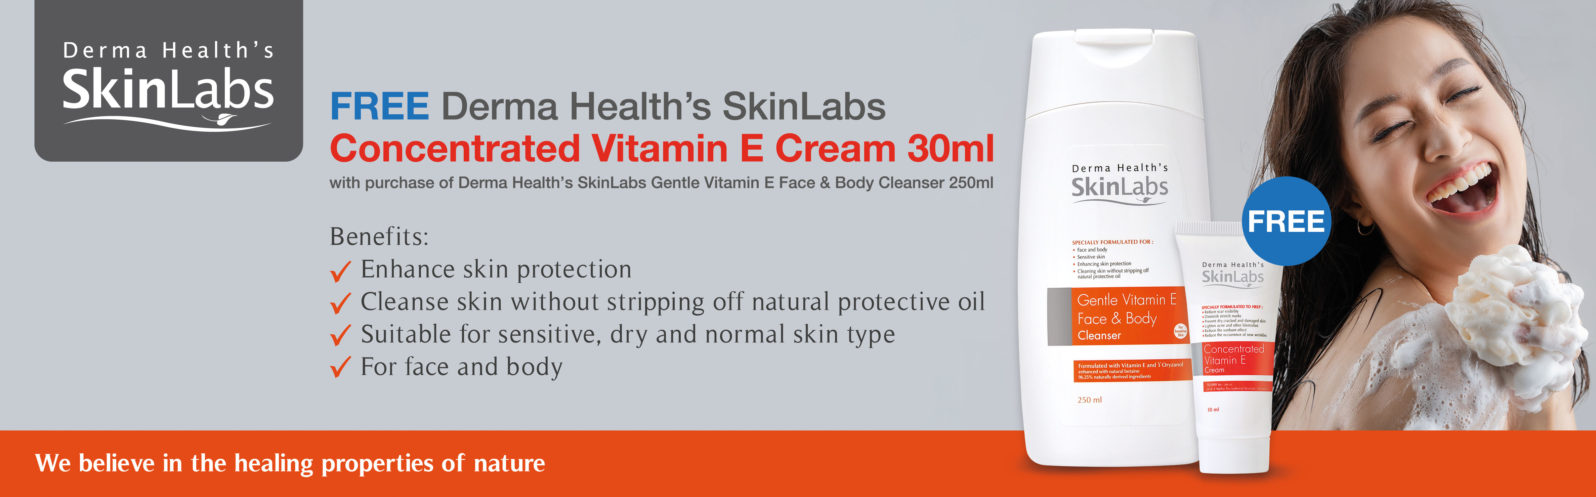 Derma Health's Skinlabs Concentrated Vitamin E Value Pack